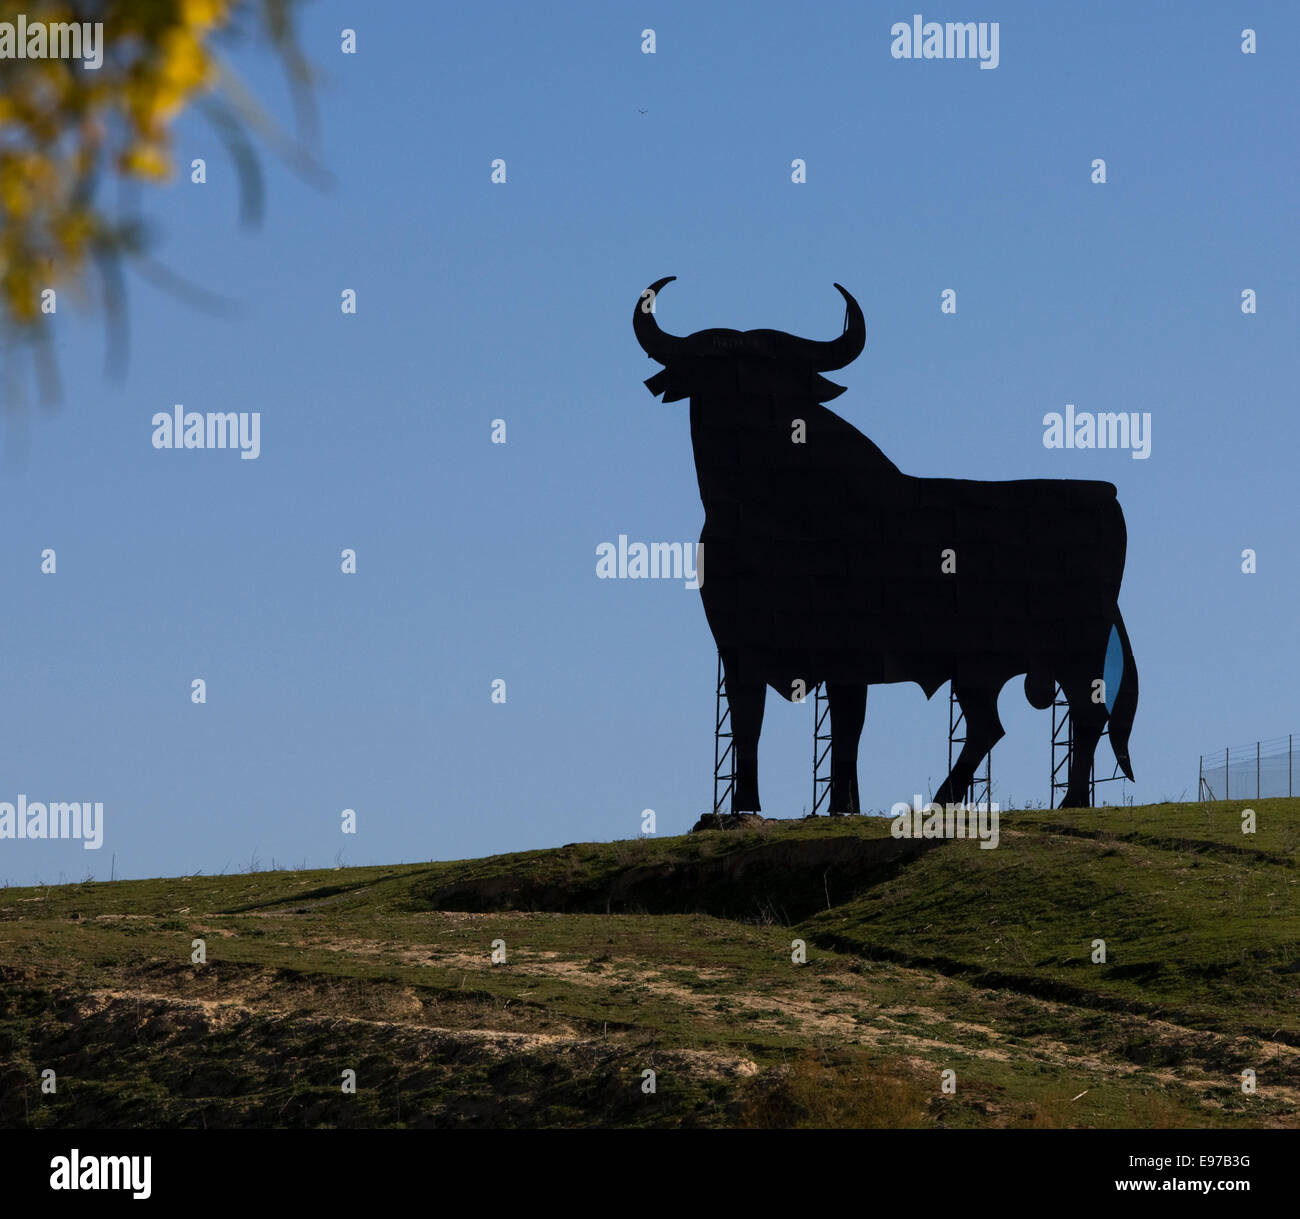 Well known profile in Spanish country side Stock Photo